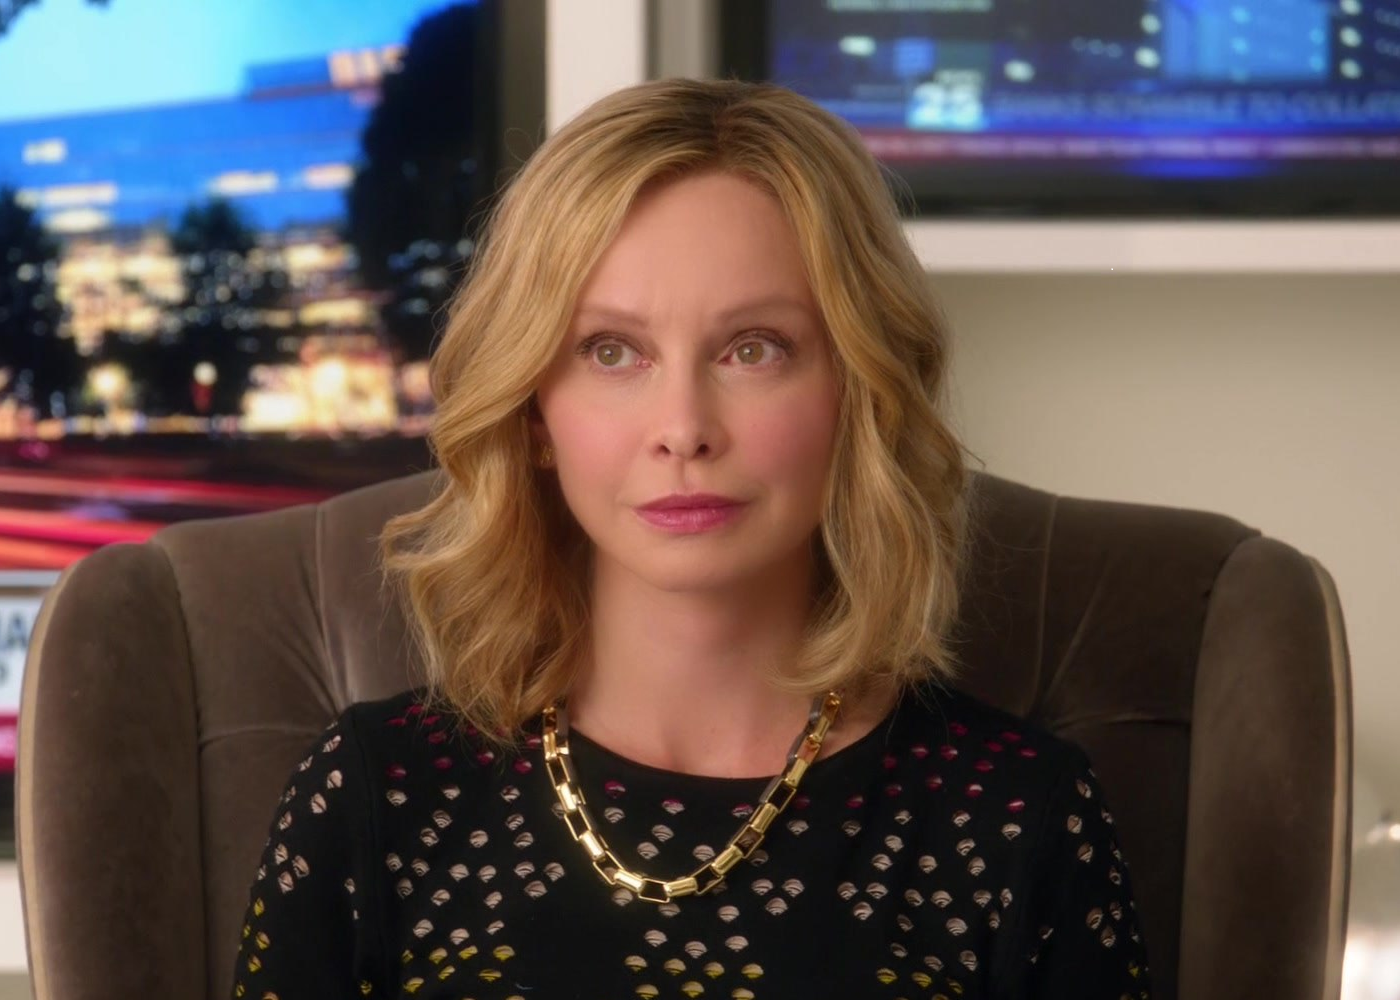 Calista Flockhart's Cat Grant Courtesy of The CW